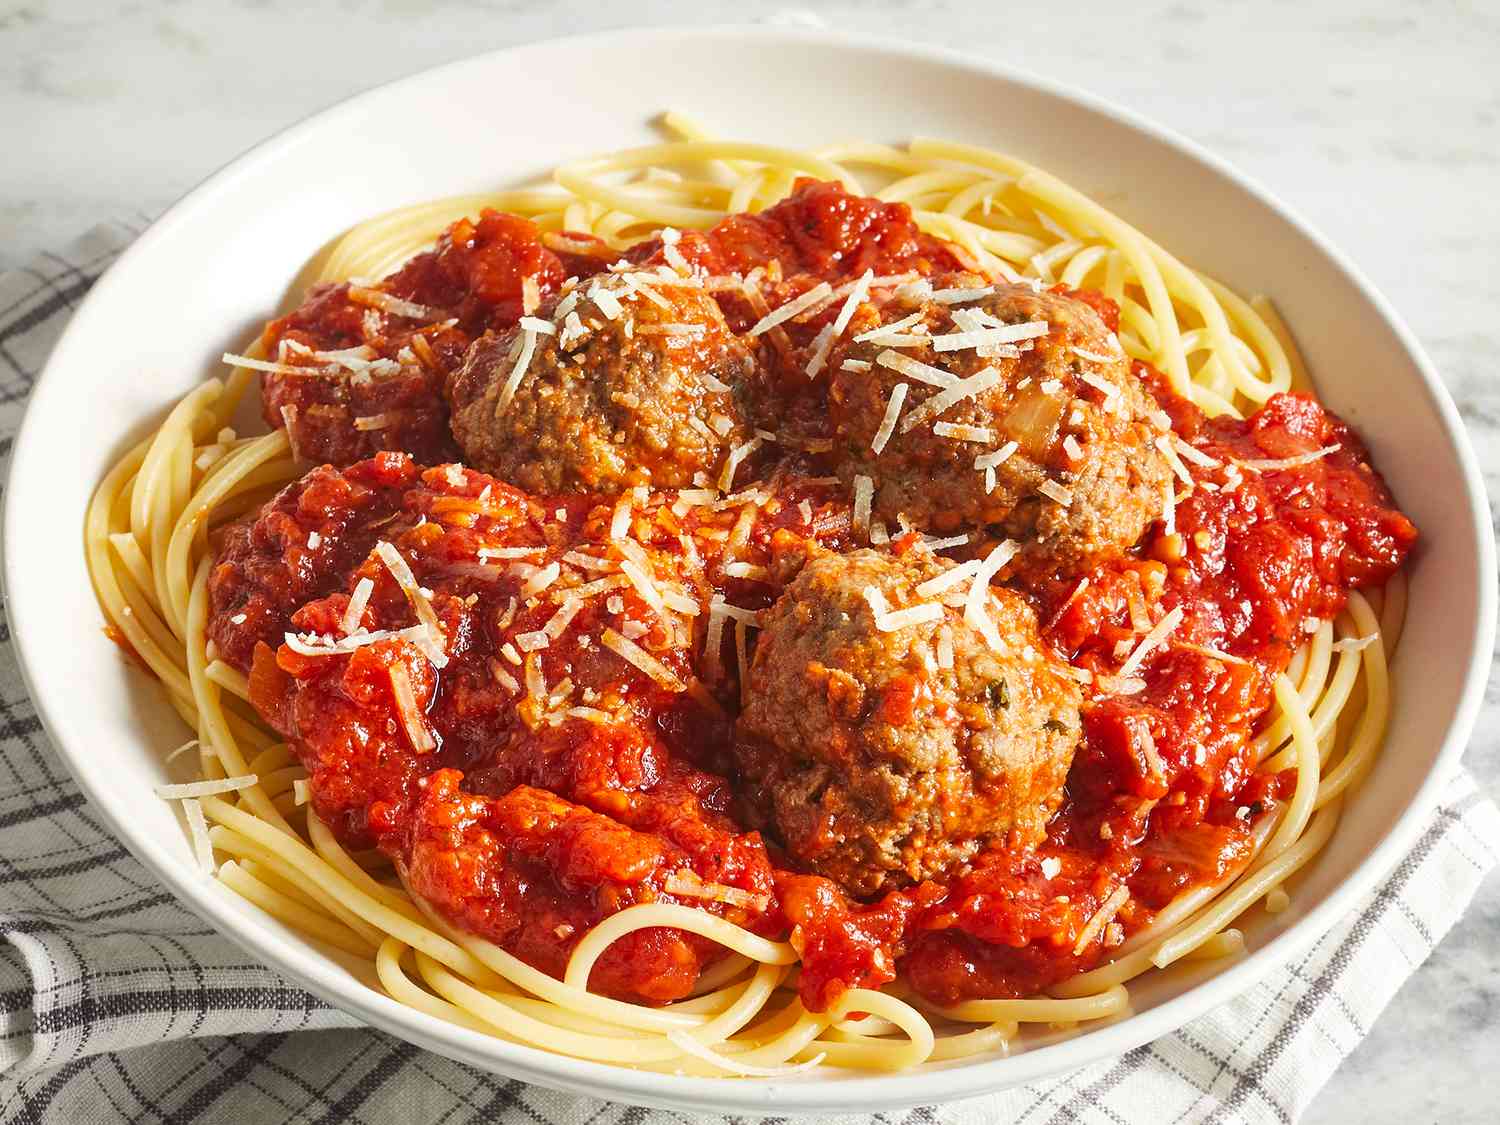 Looking into a single serving of spaghetti topped with a red sauce, meatballs, and parmesan cheese.